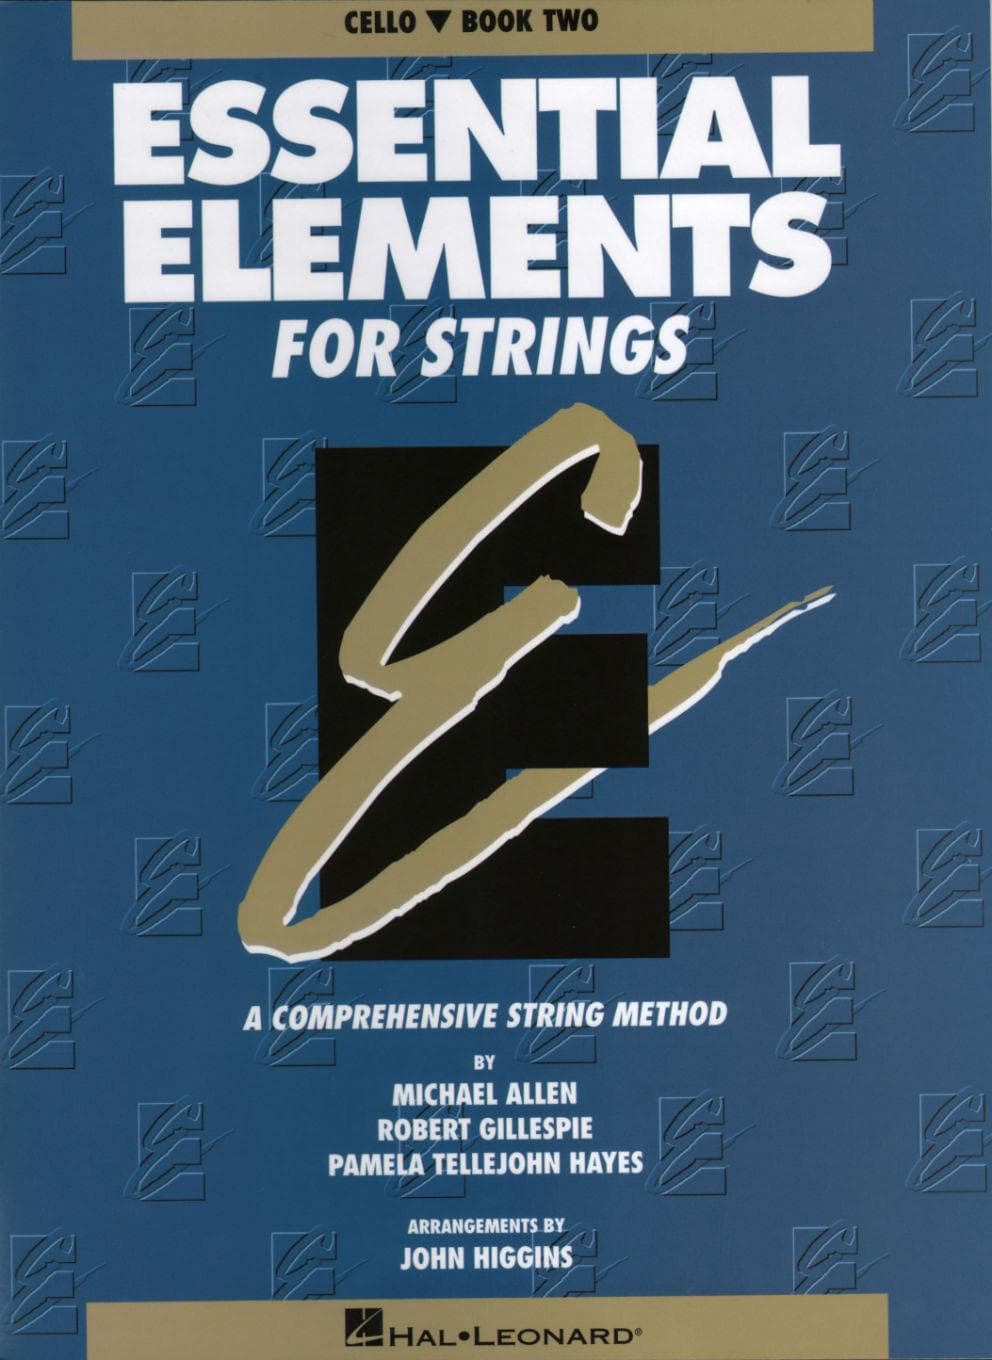 Essential Elements For Strings, Book 2 - Cello - by Allen/Gillespie/Hayes - Hal Leonard Publication